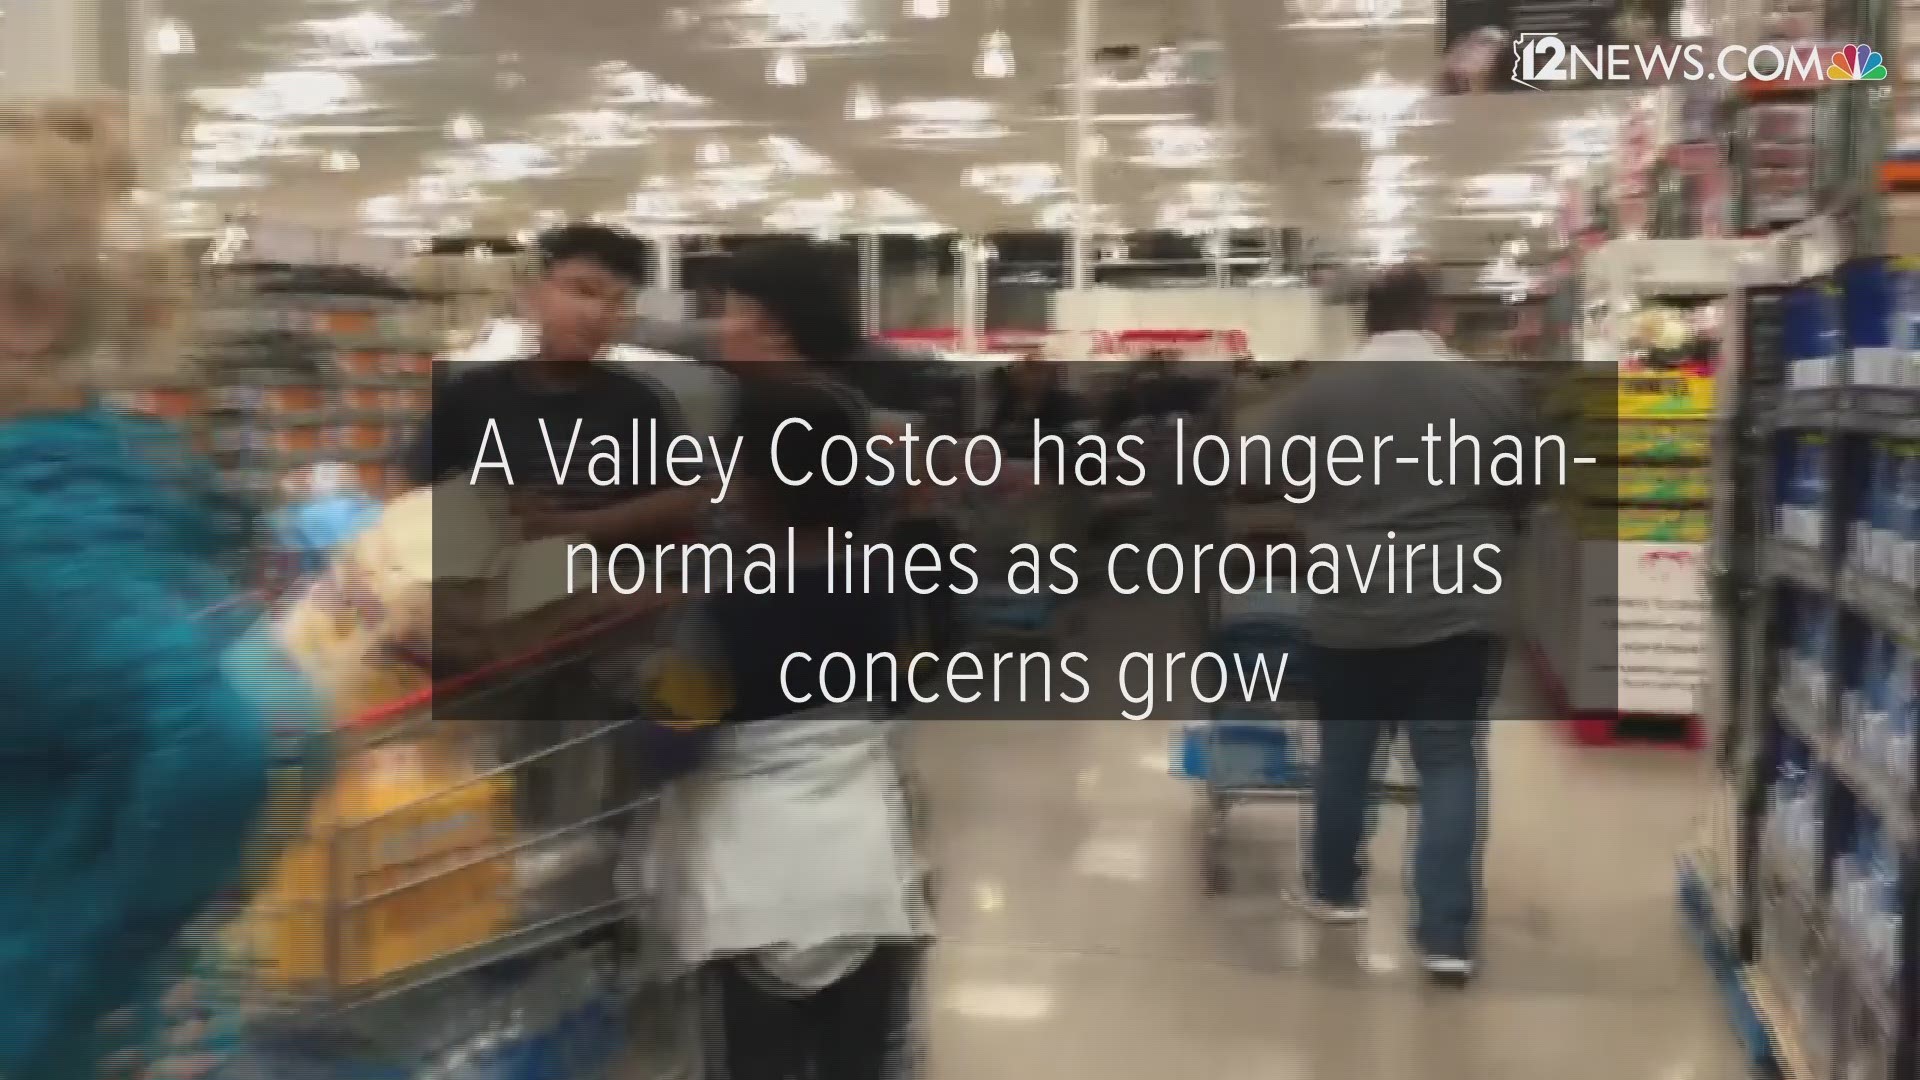 Shelves in a Valley Costco were cleared of things like toilet paper as worries about coronavirus grow. But the DHS says that's the wrong thing to do.